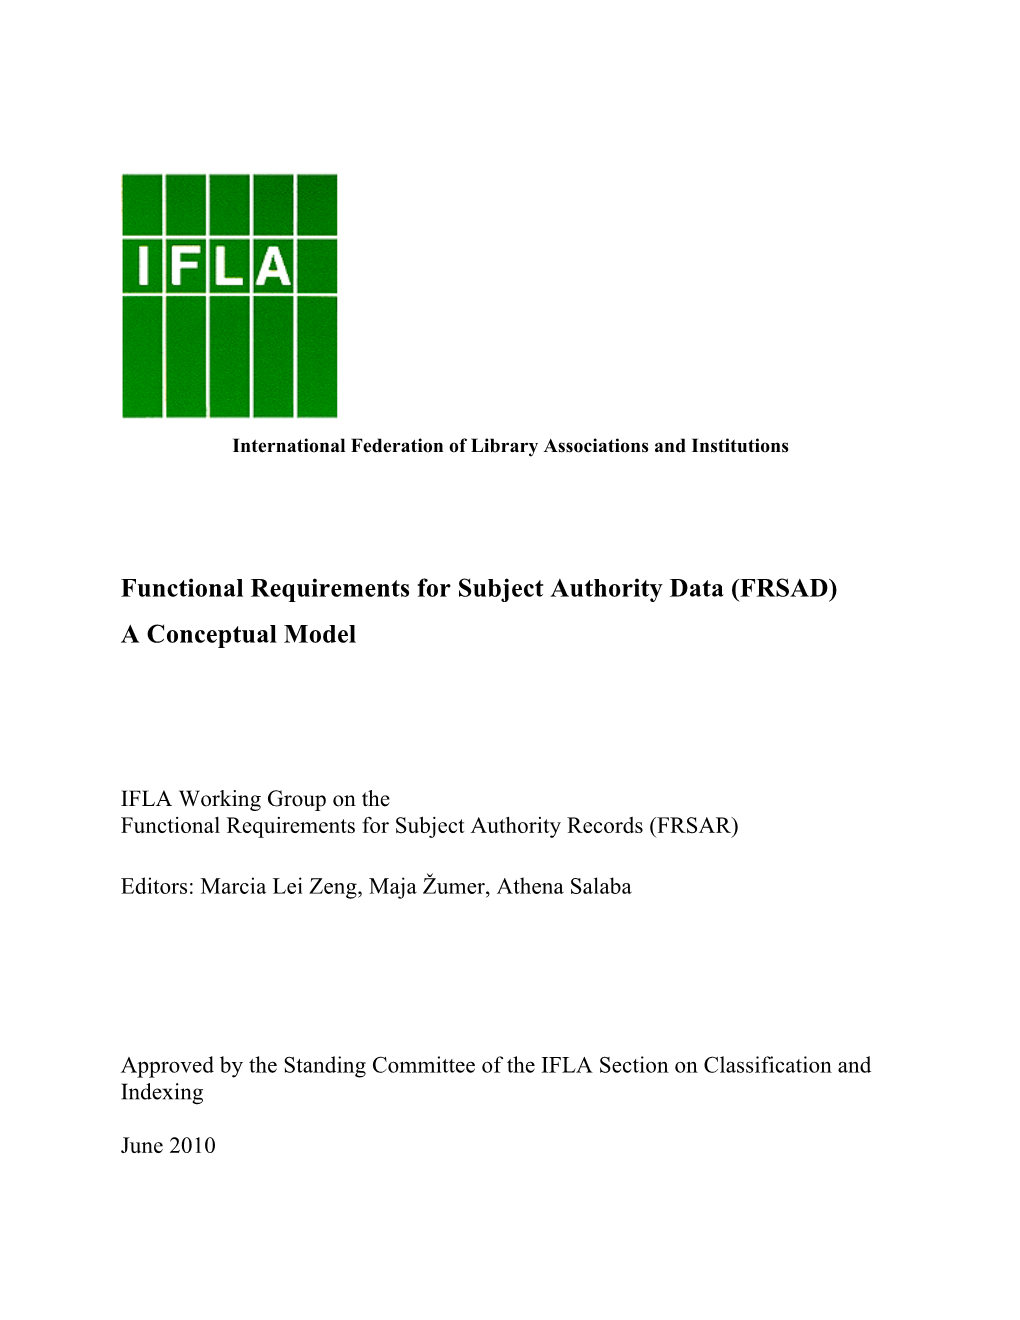 Functional Requirements for Subject Authority Data (FRSAD) a Conceptual Model